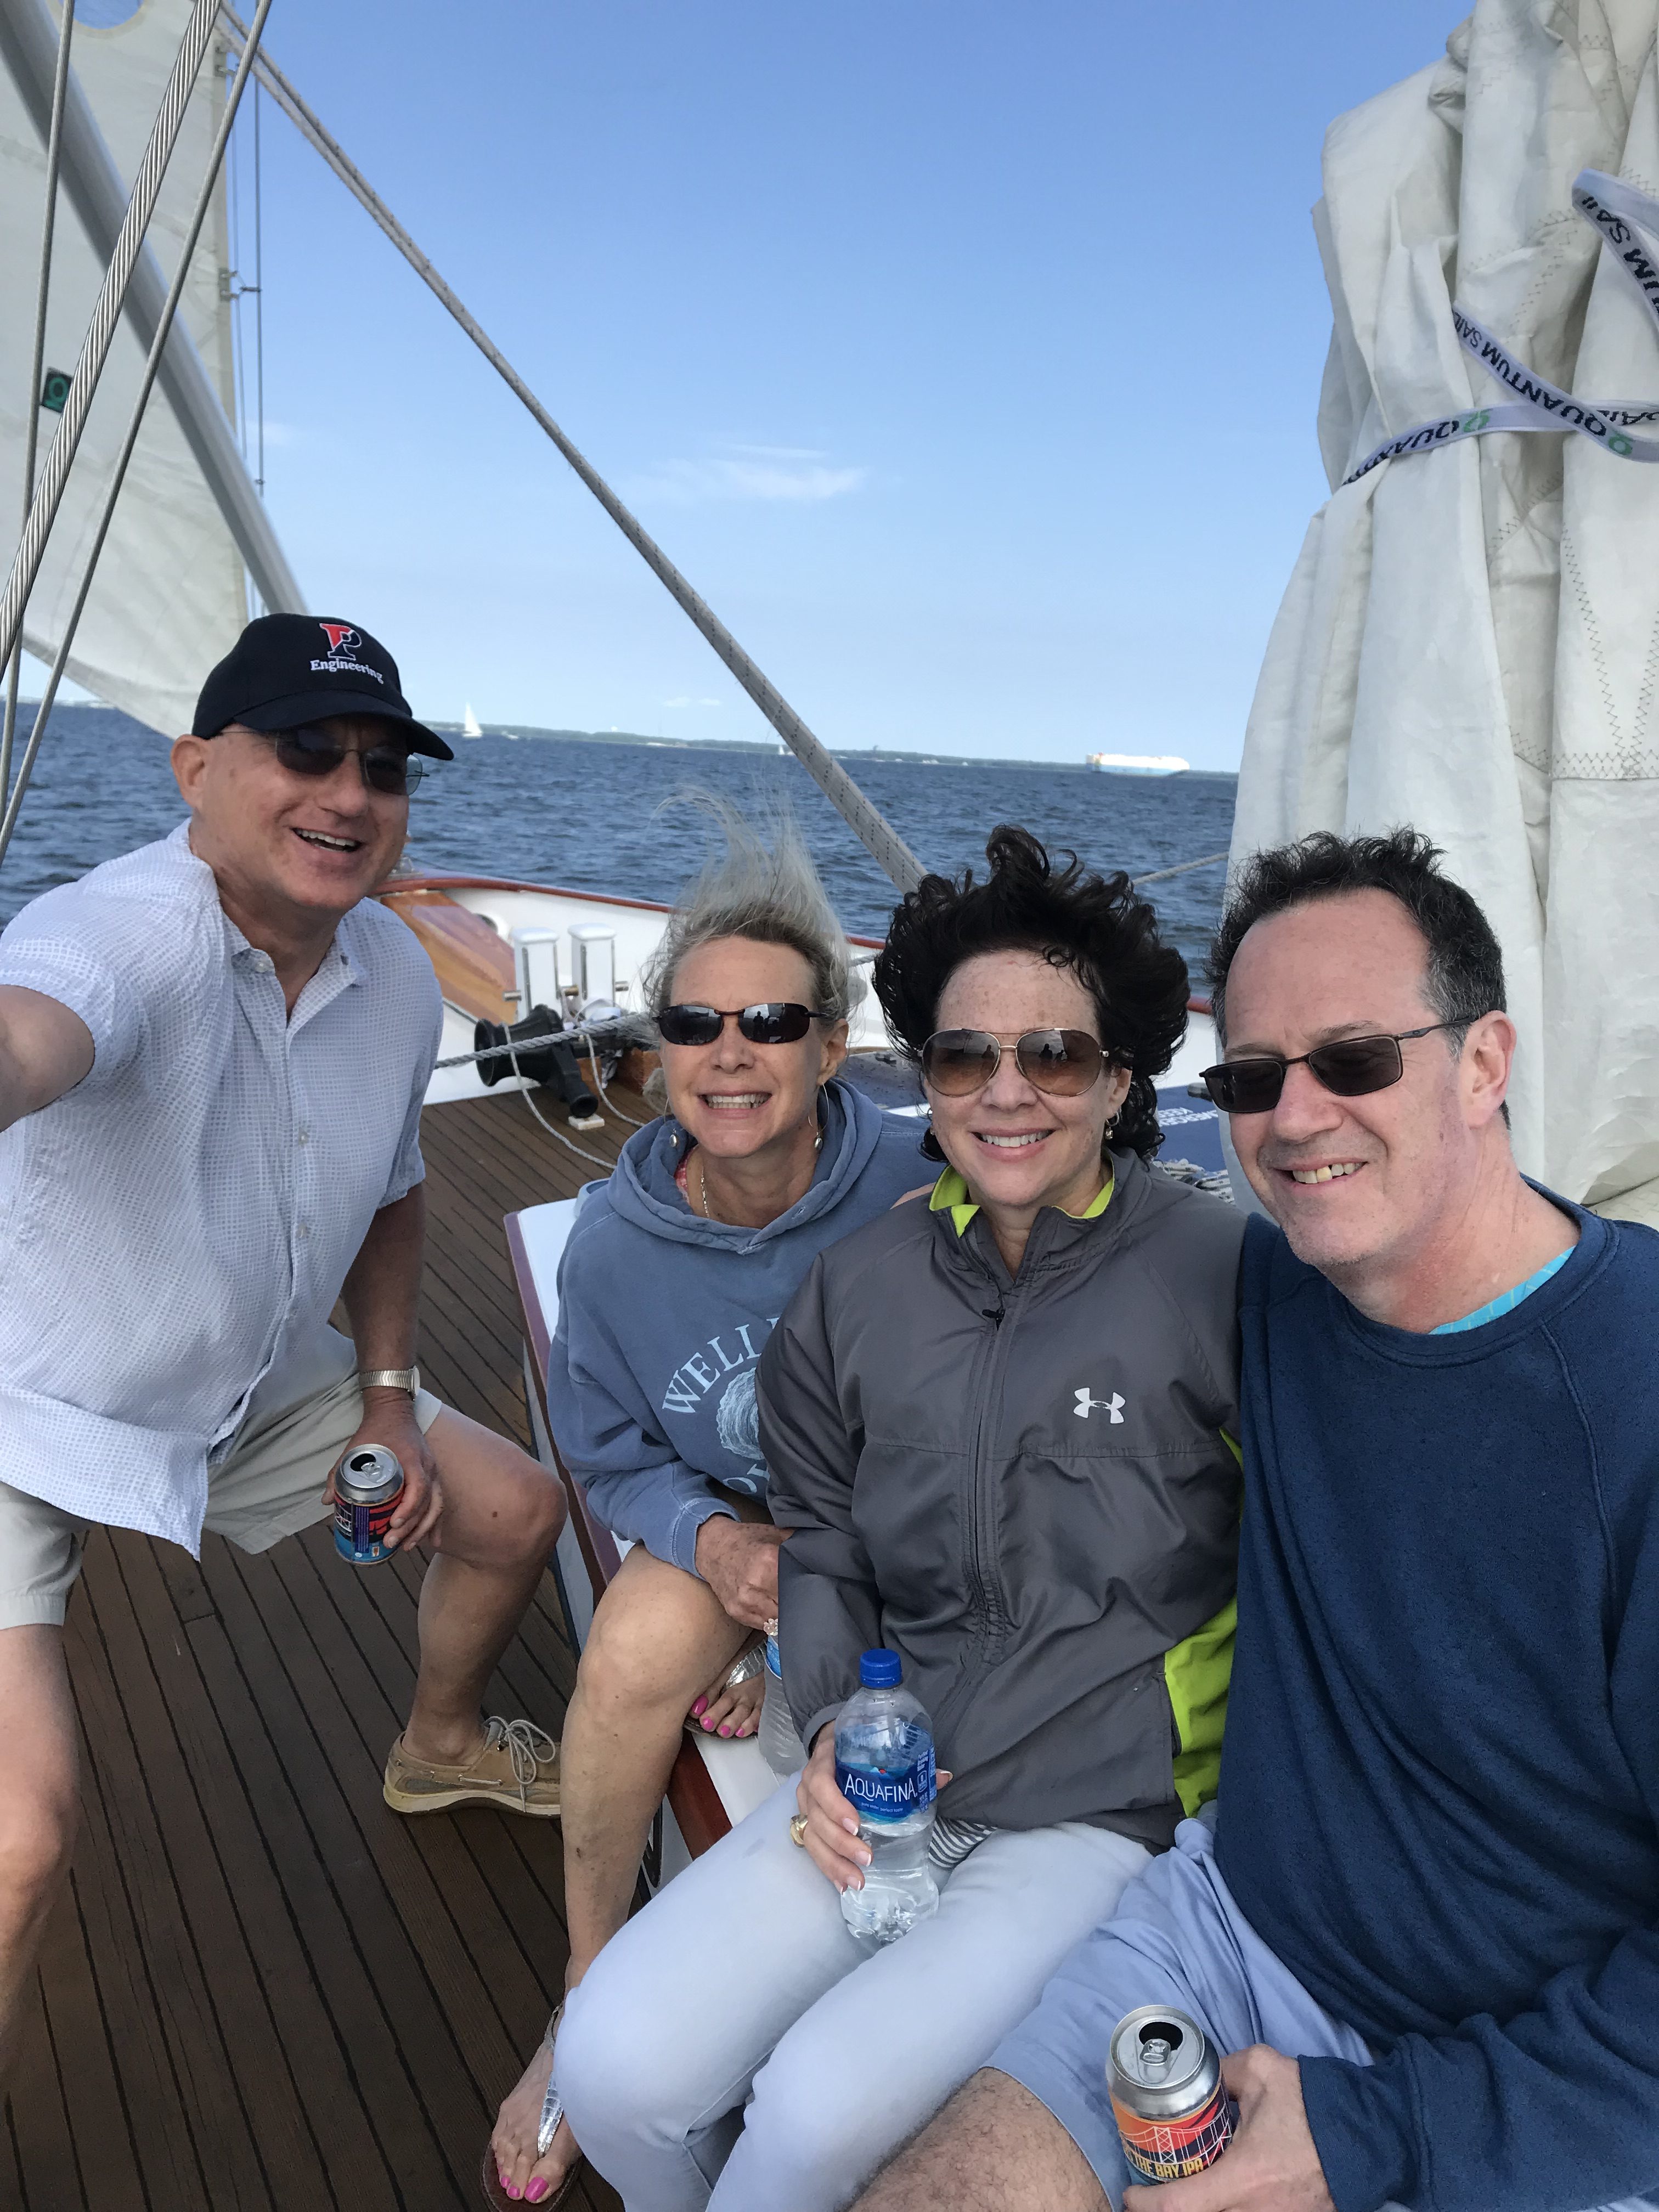 Four people smiling and having fun on the schooner